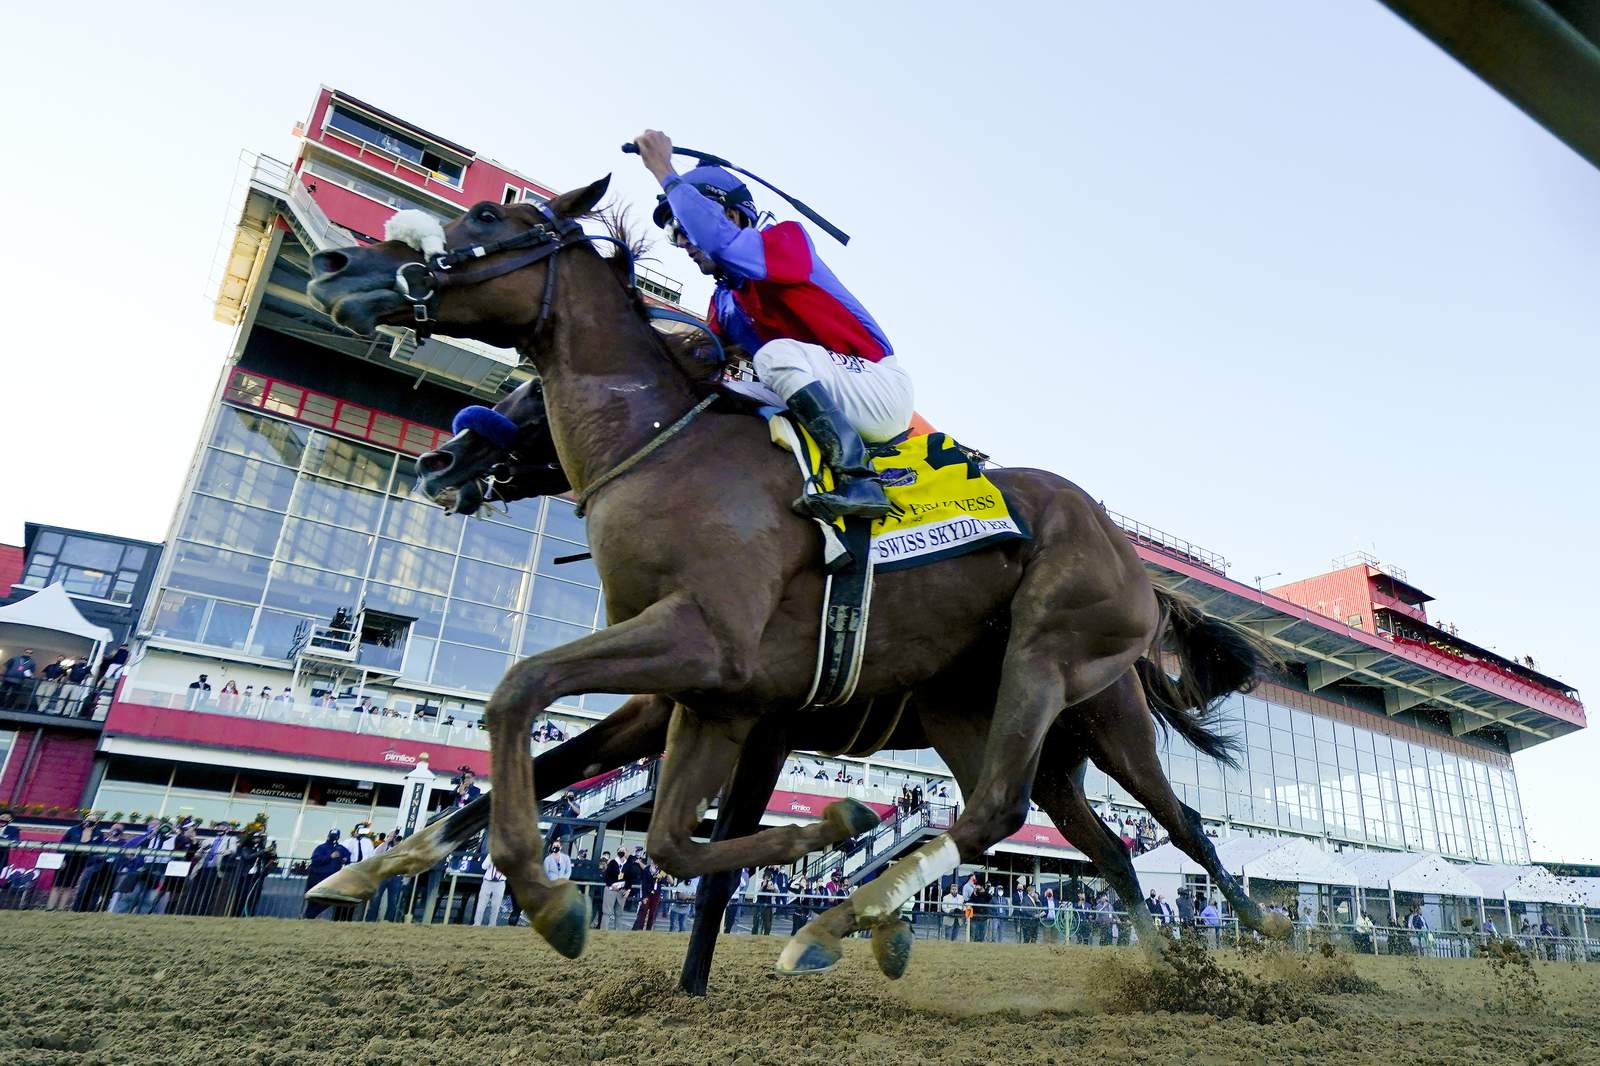 Winning filly: Swiss Skydiver beats Authentic in Preakness